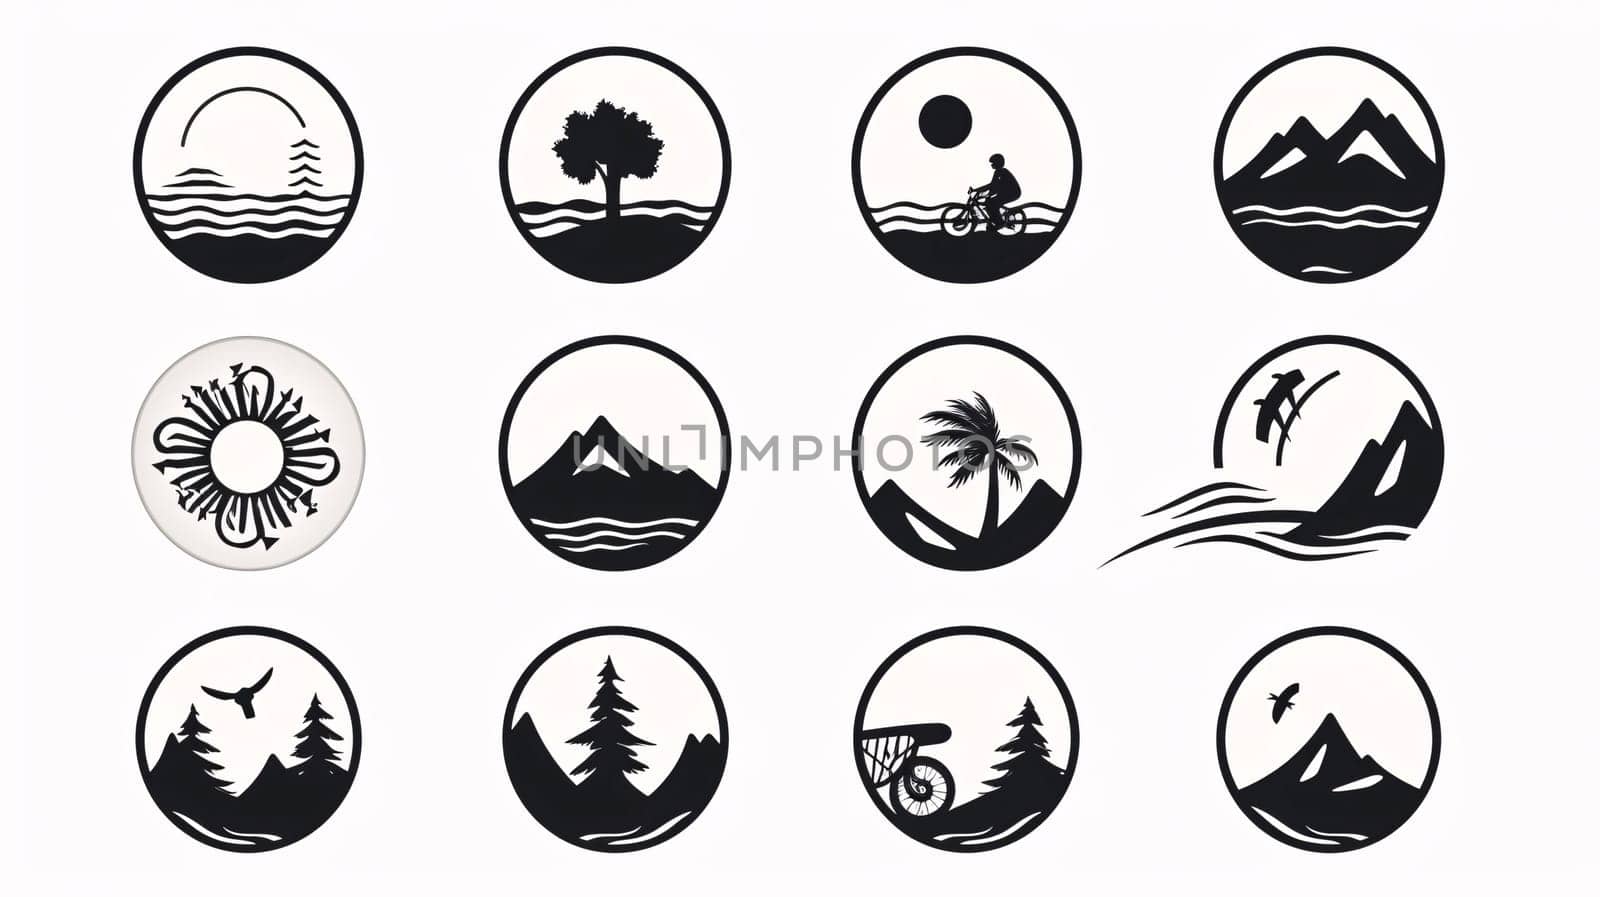 New icons collection: set of icons on the theme of the sea, mountains, sun, waves, bikers and other things